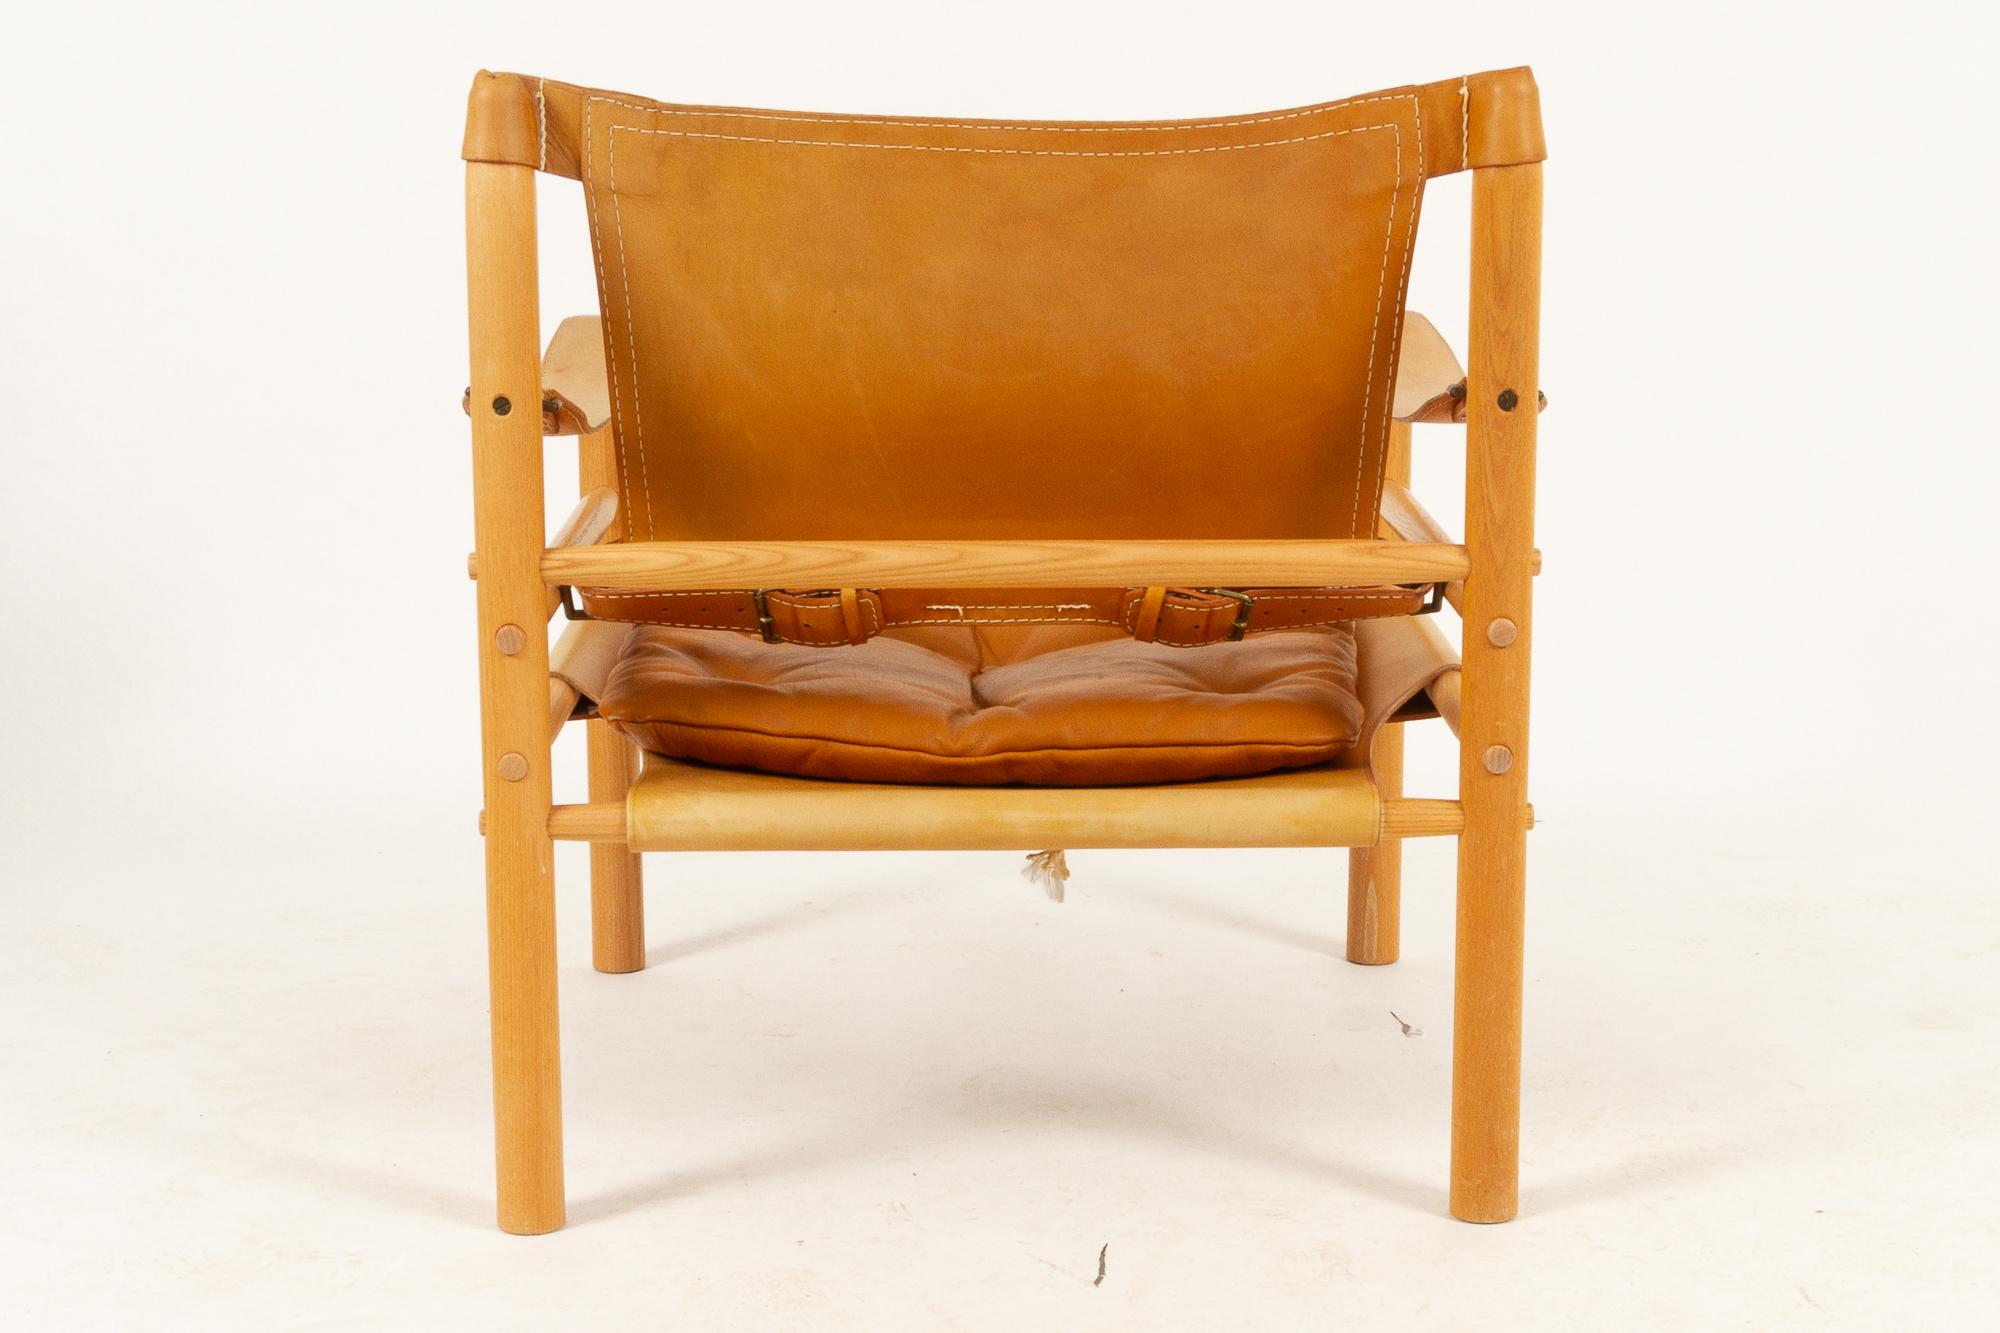 Leather Arne Norell Sirocco Safari Chair, 1960s.